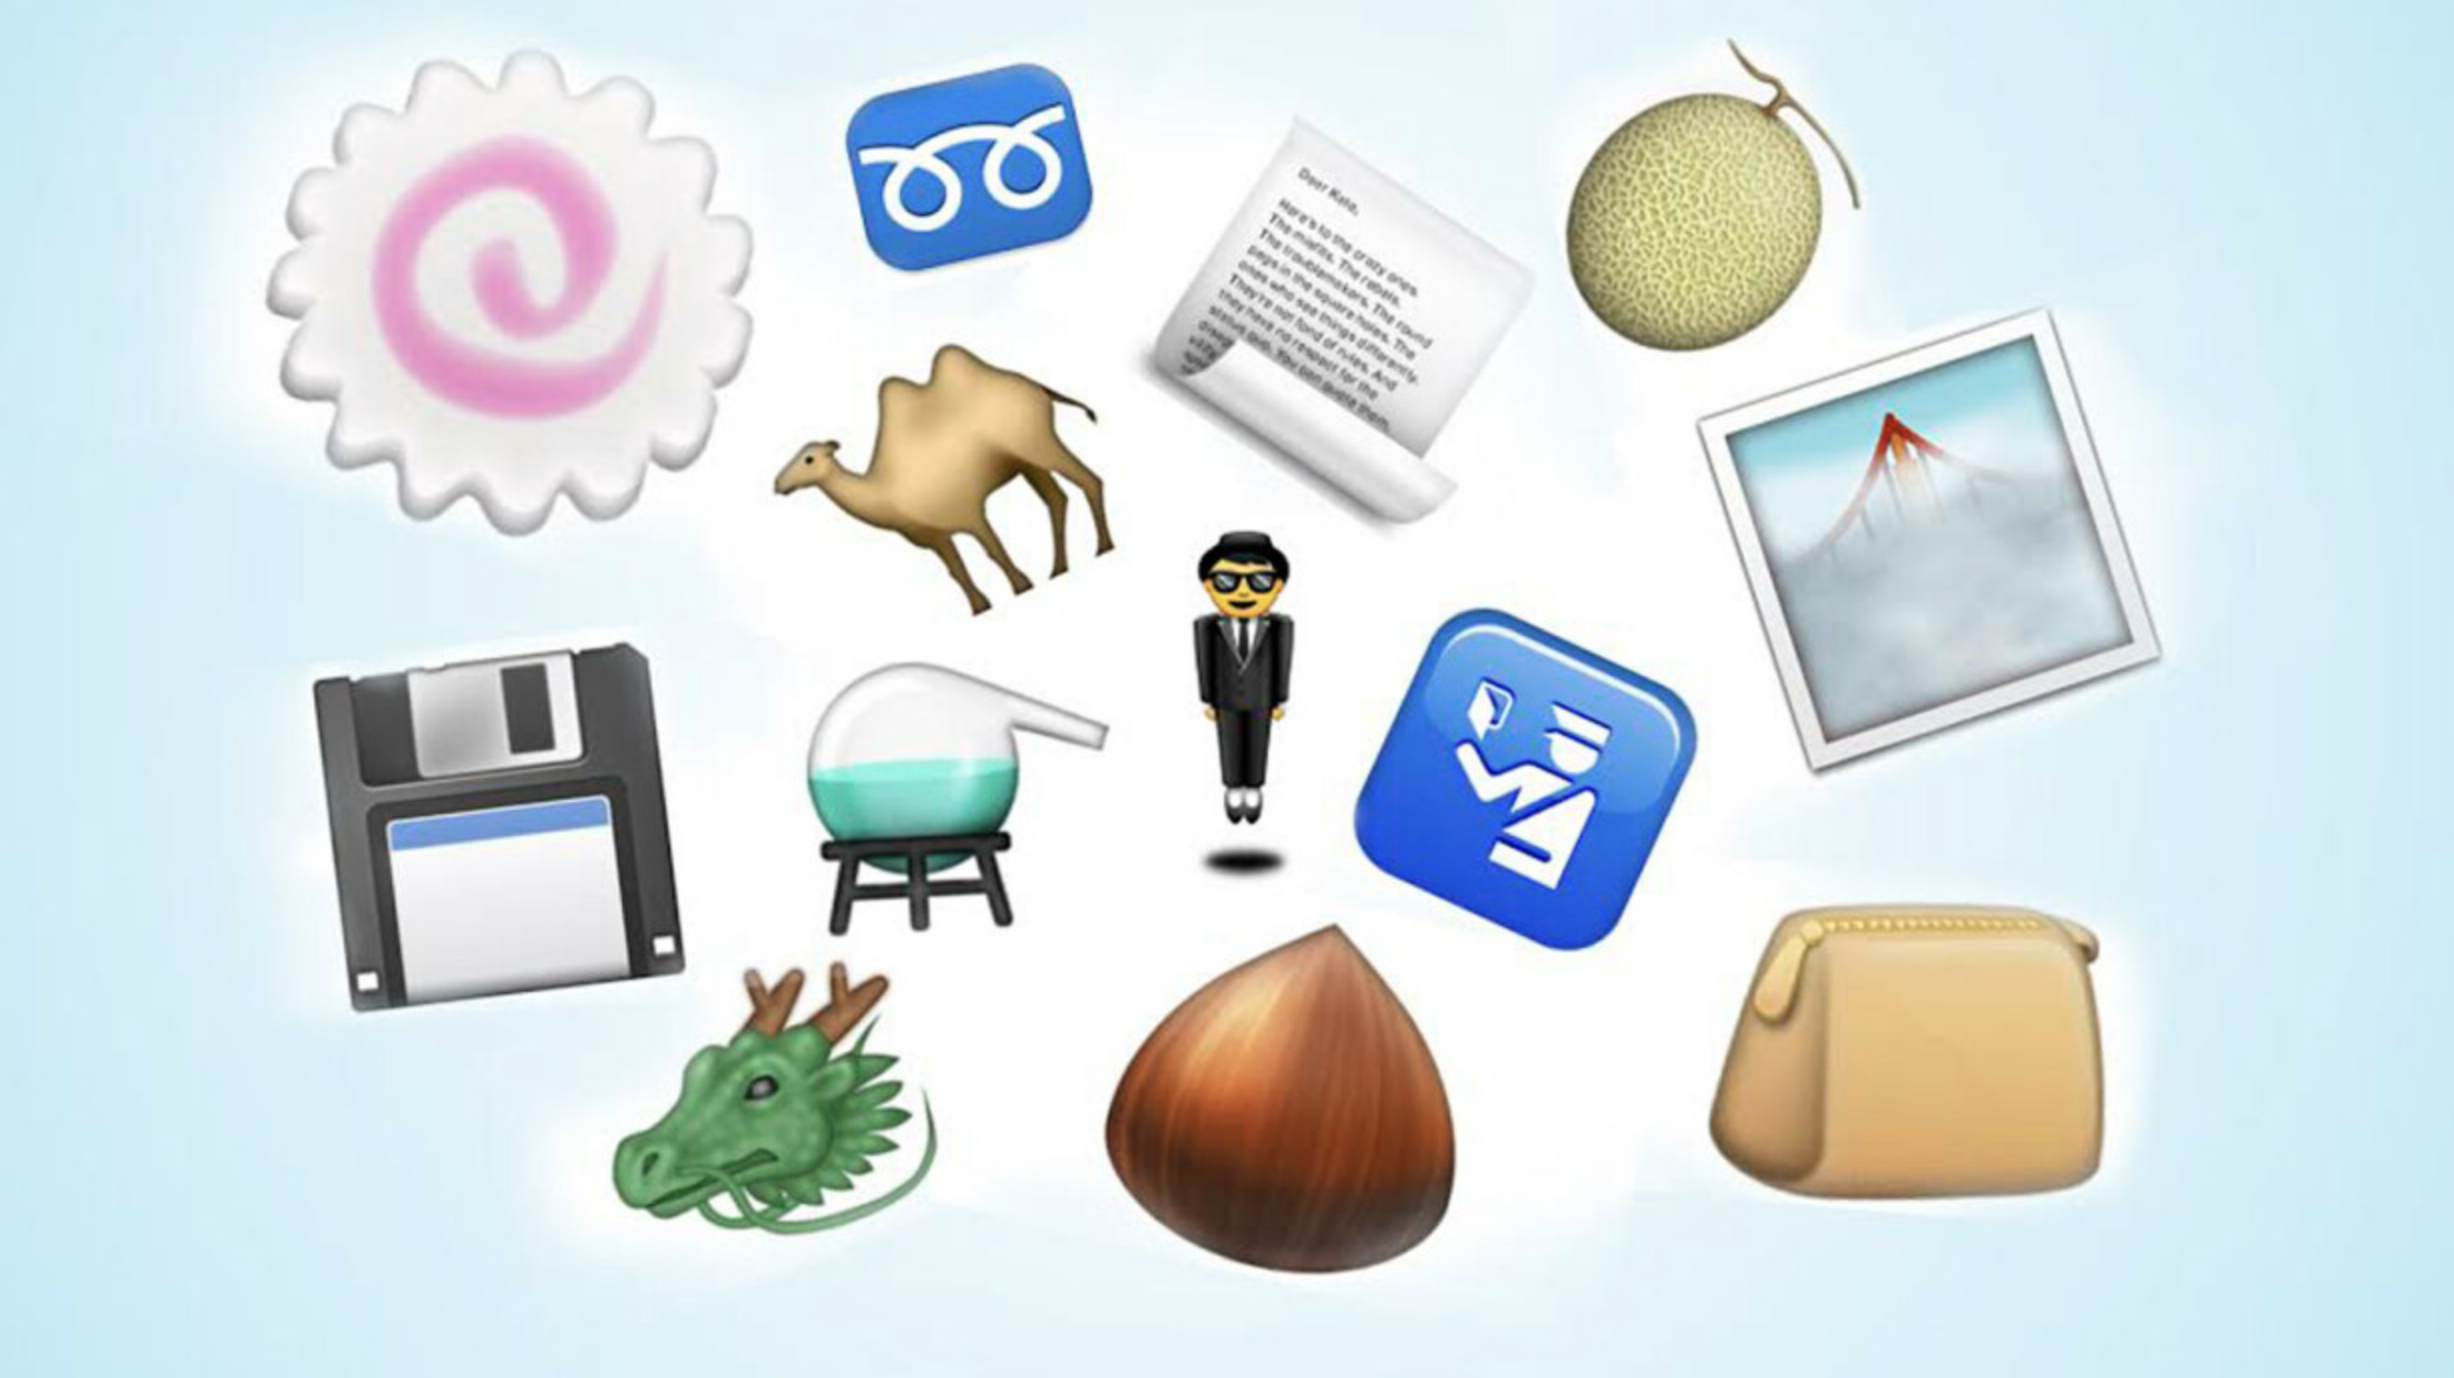 16 of the most useless emoji and how to make them useful